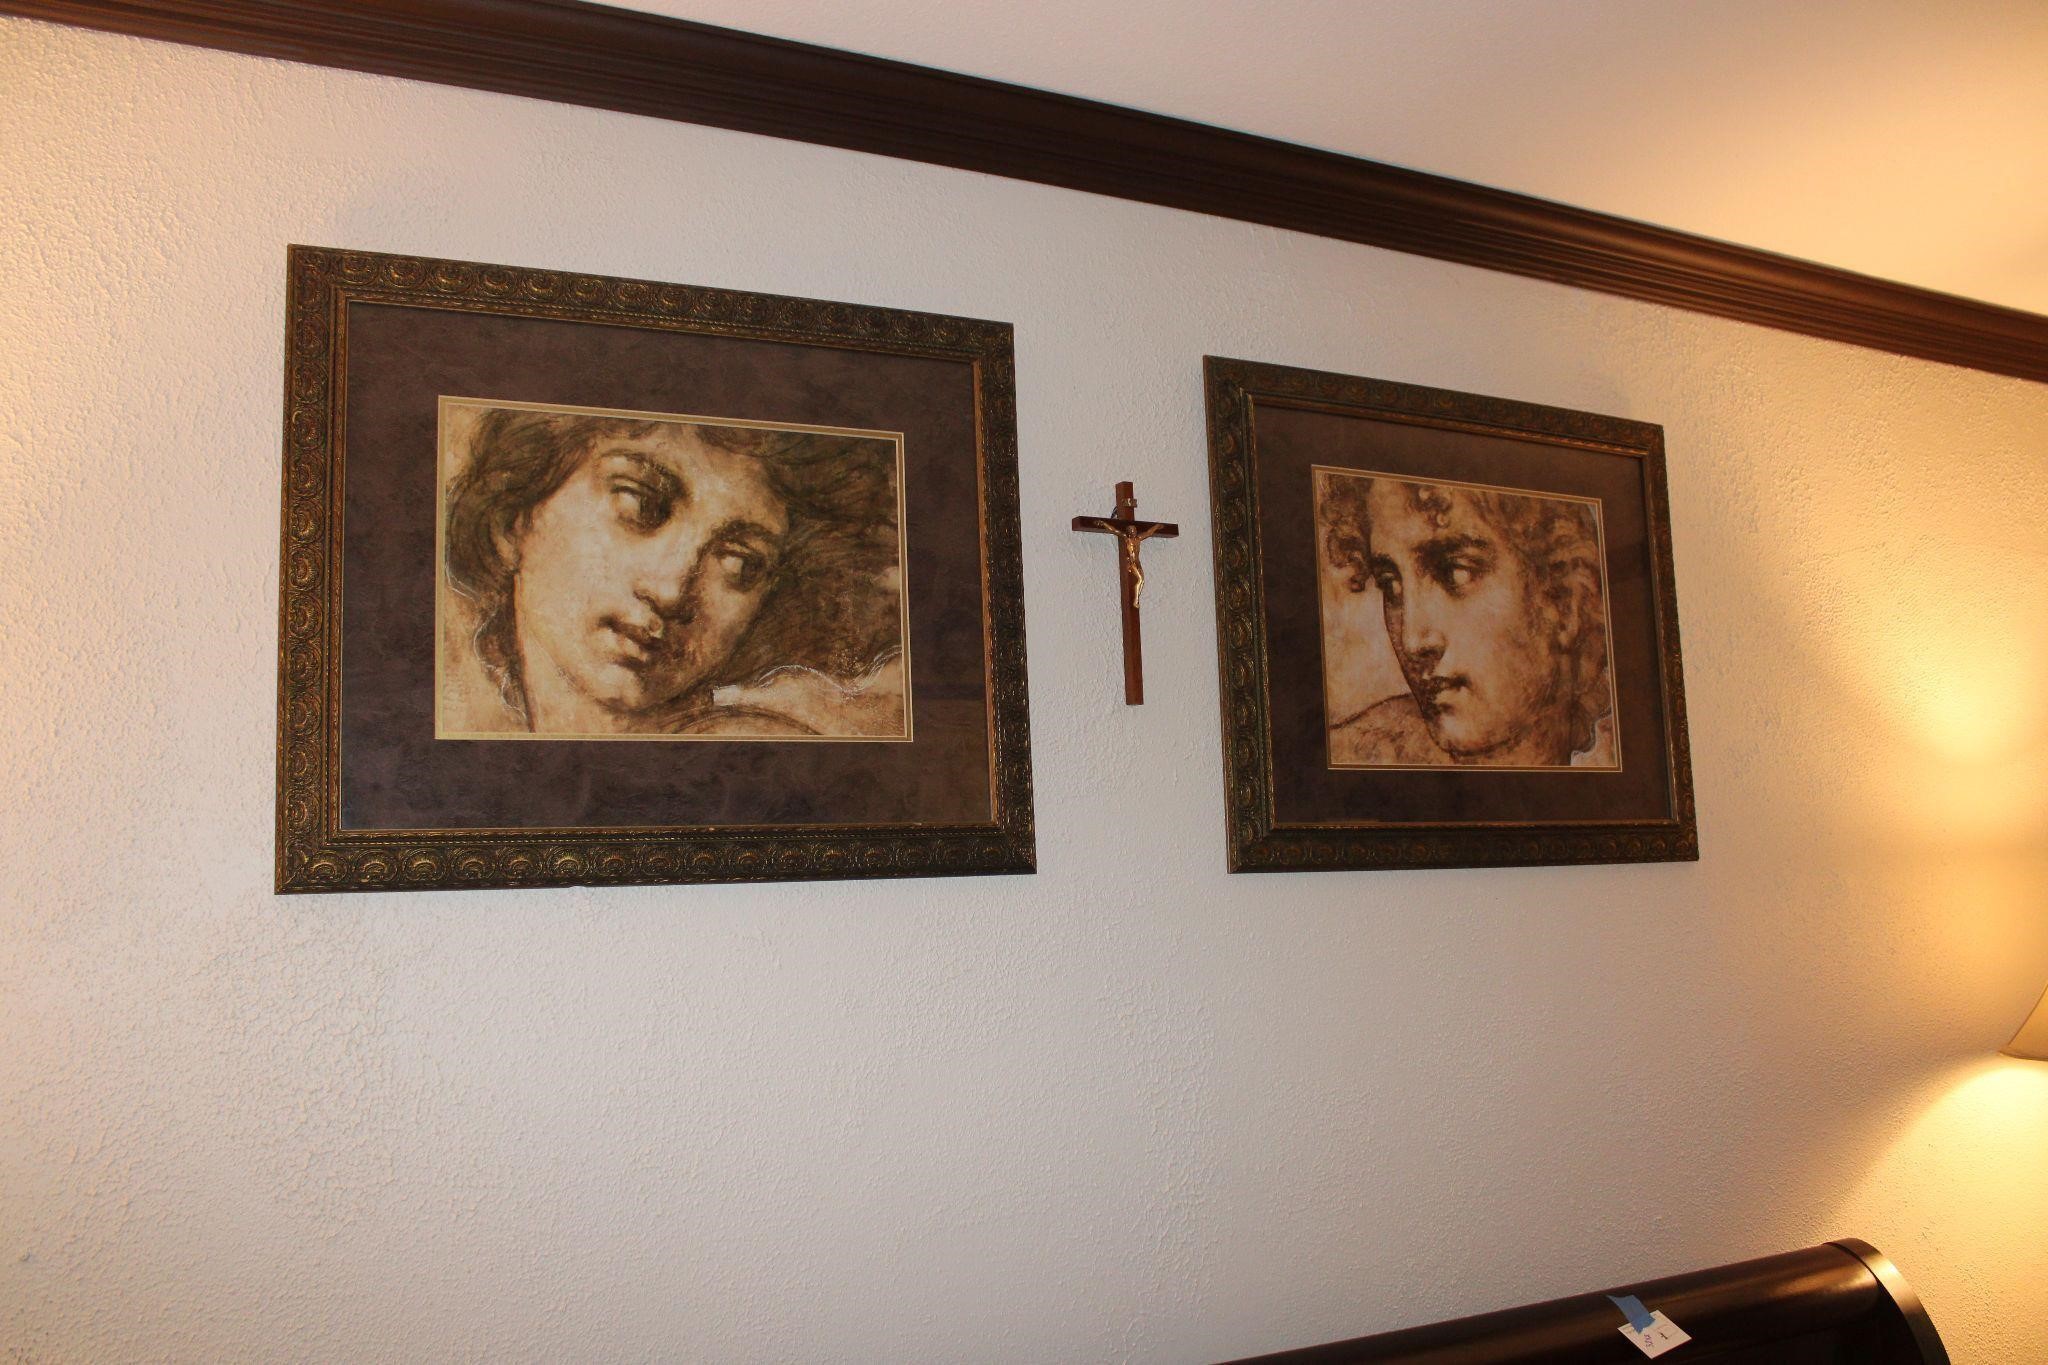 Large Framed Art And Crucifixes